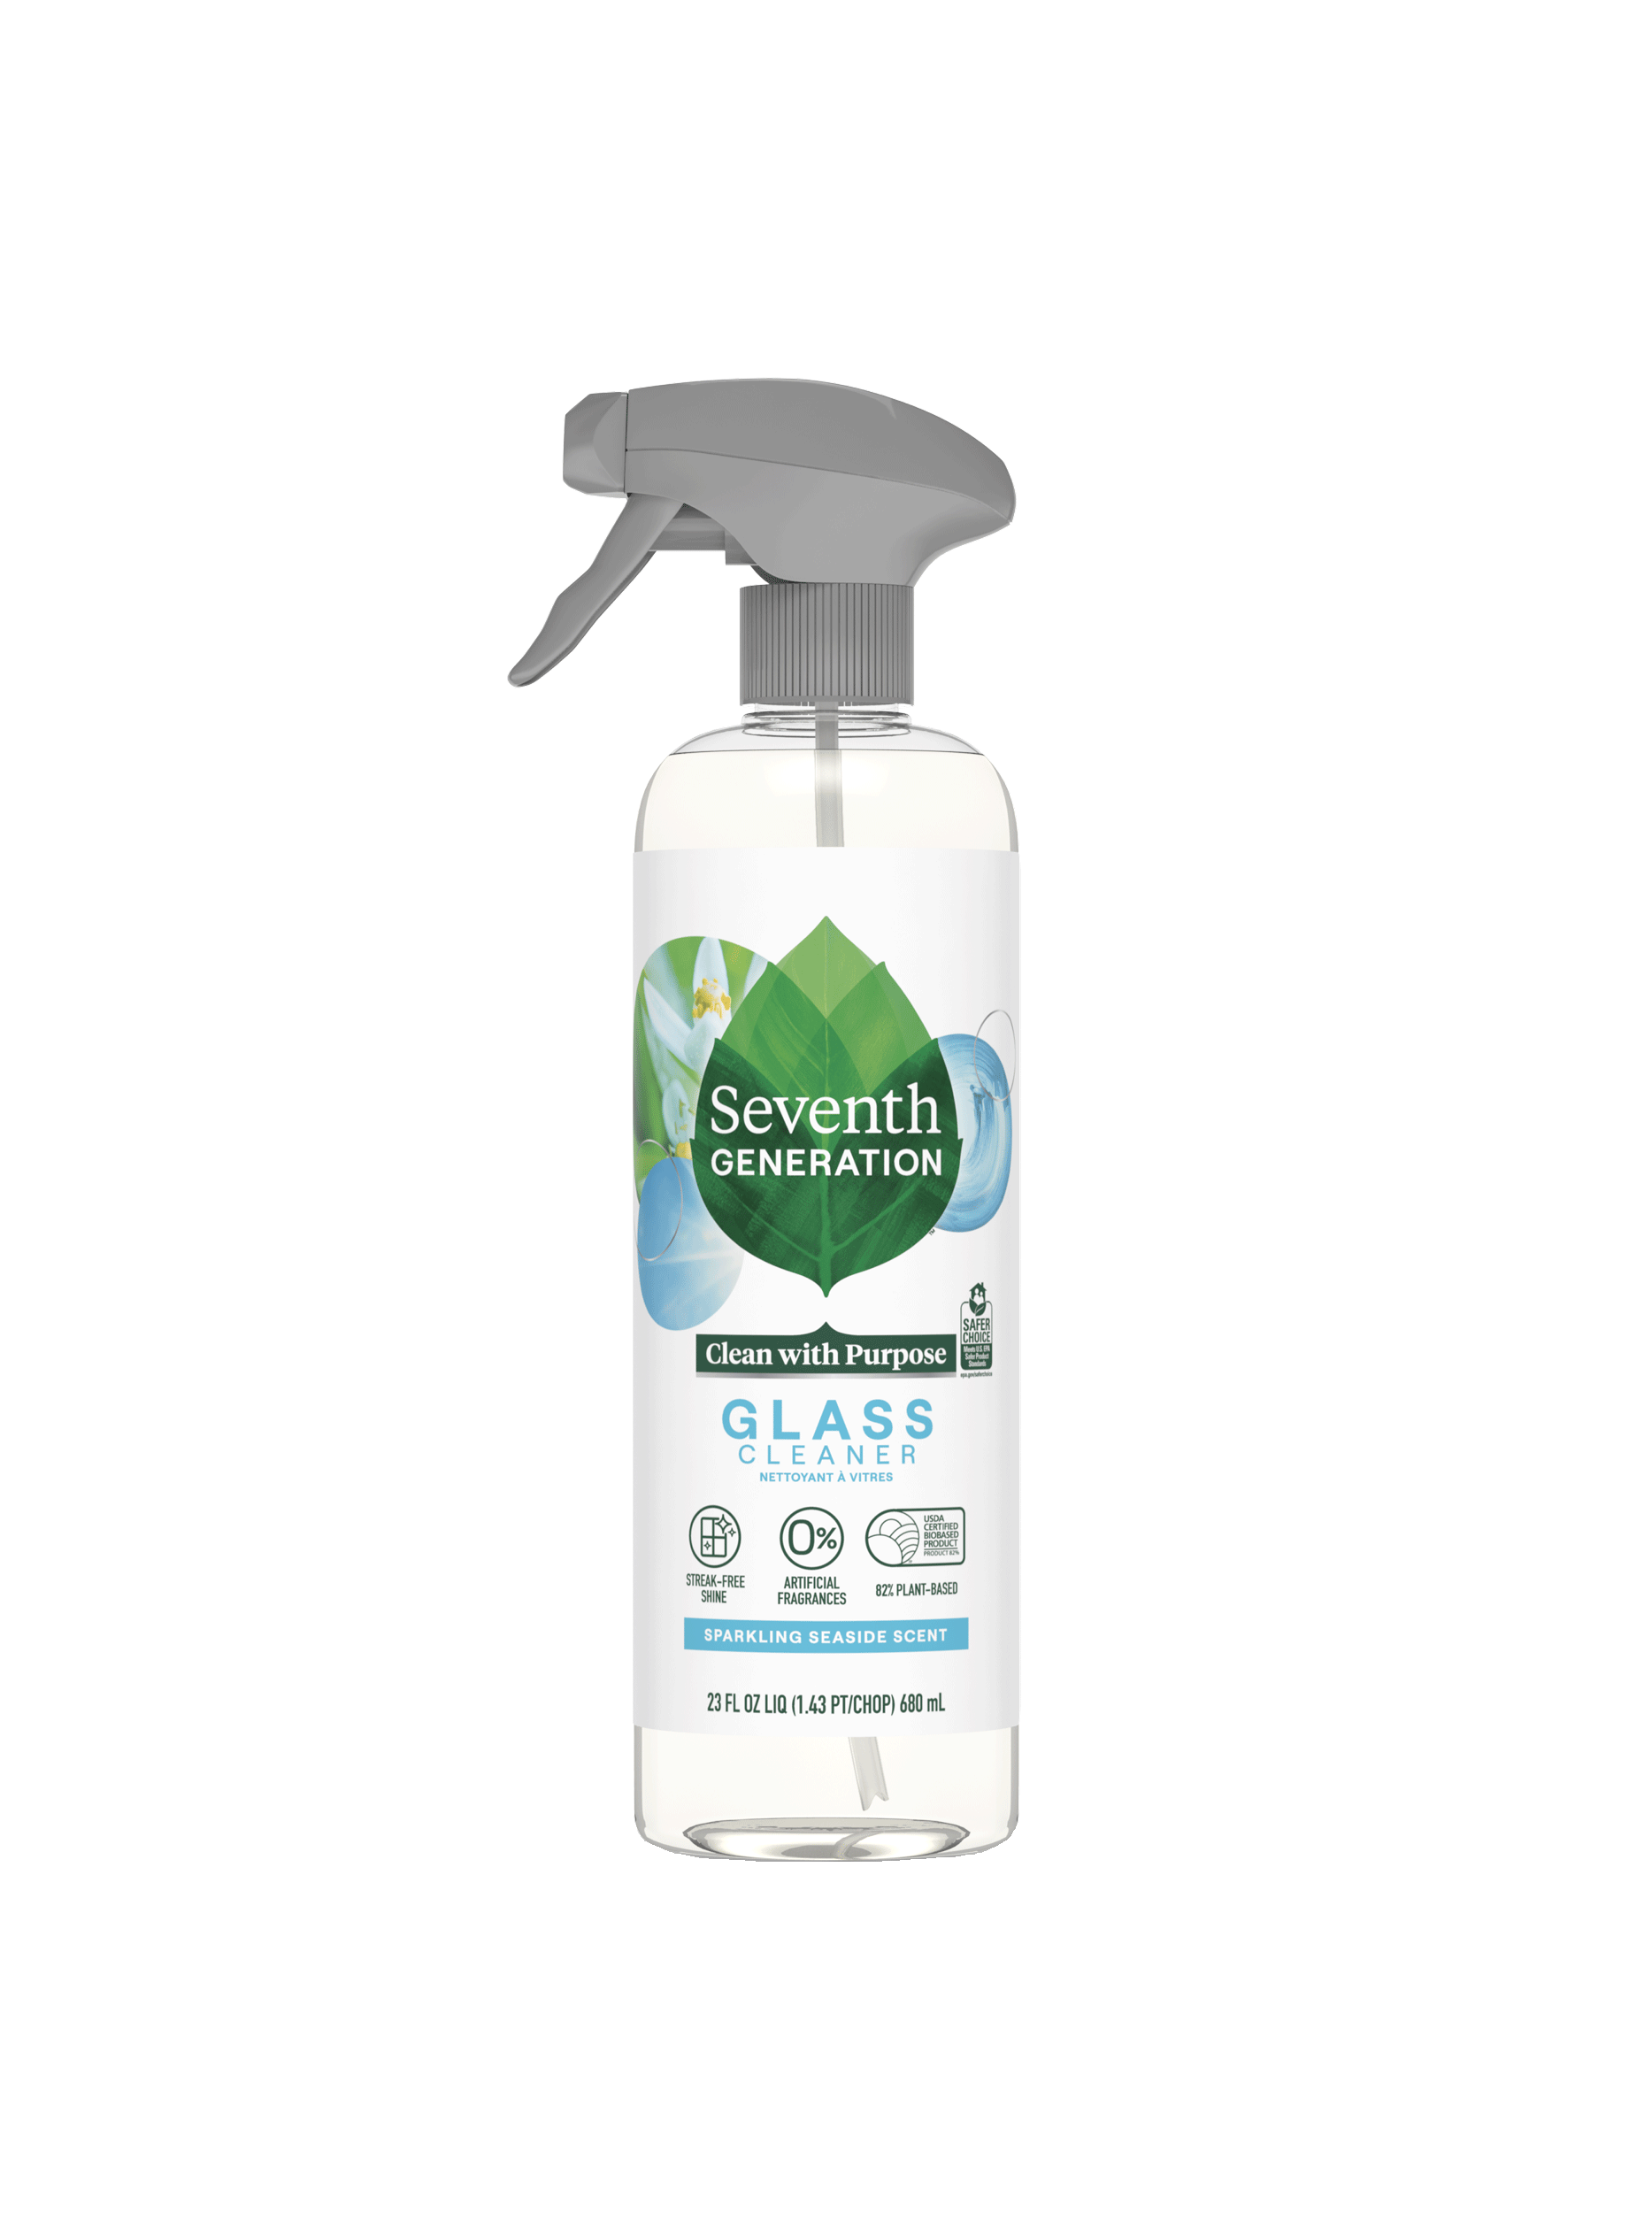 Glass cleaner - Parkit Official Product store